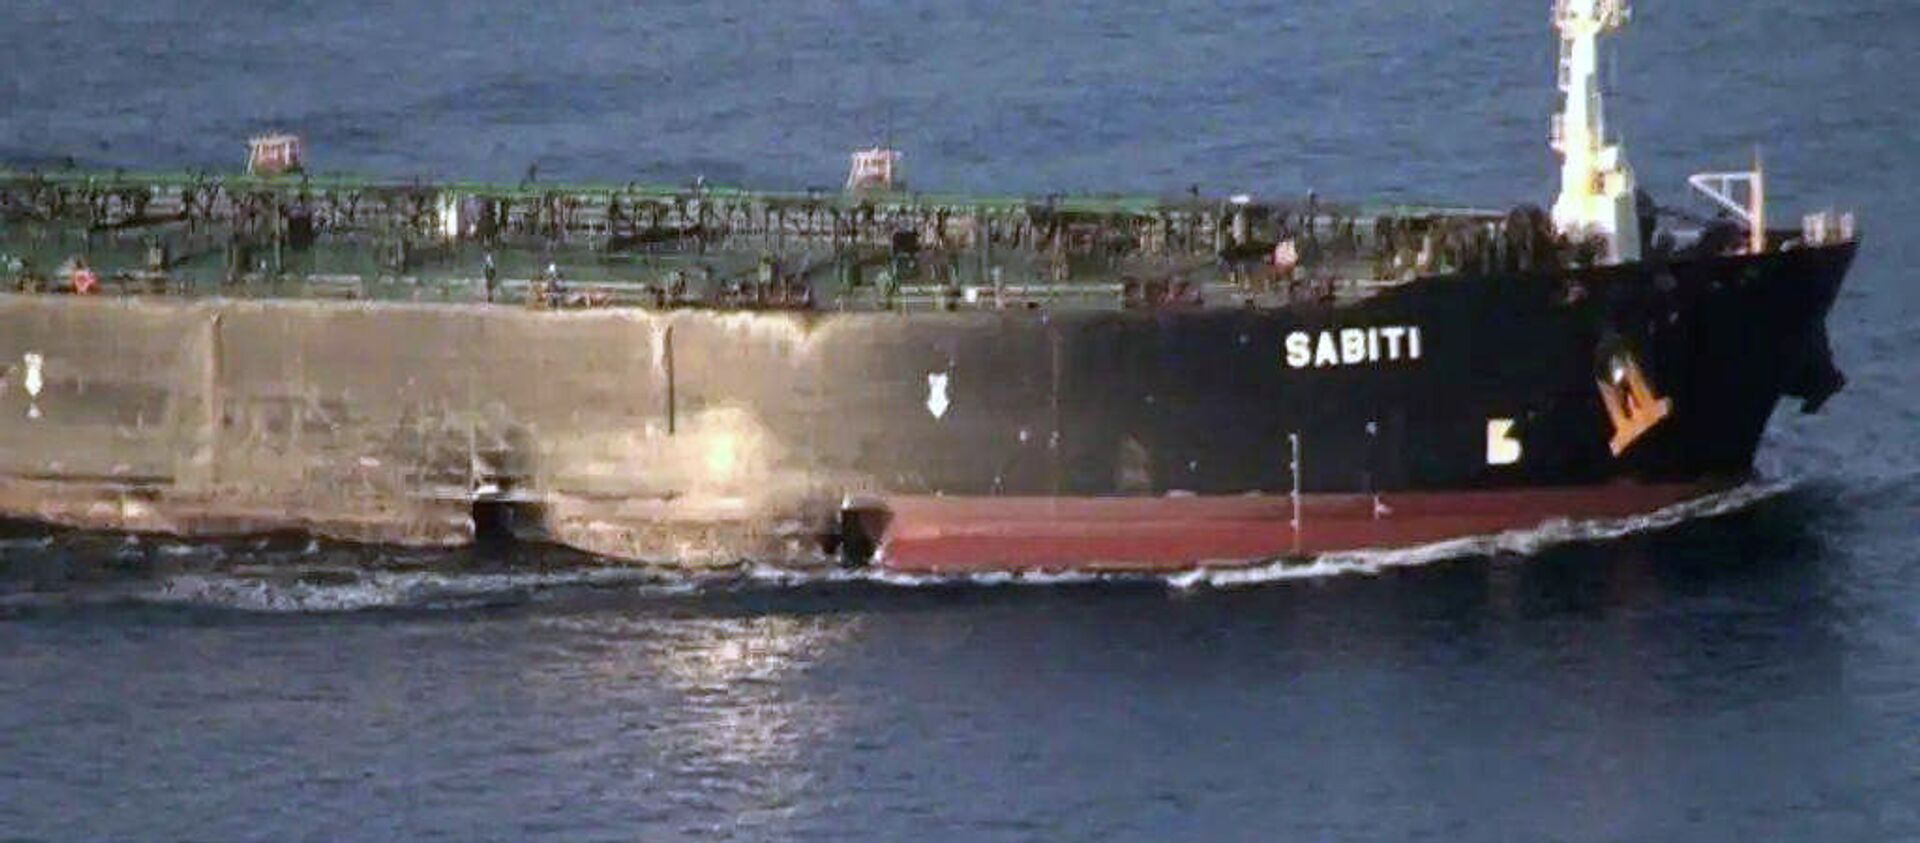 A damage is seen on Iranian-owned Sabiti oil tanker sailing in the Red Sea, October 13, 2019. Picture taken October 13, 2019. - Sputnik International, 1920, 21.10.2019